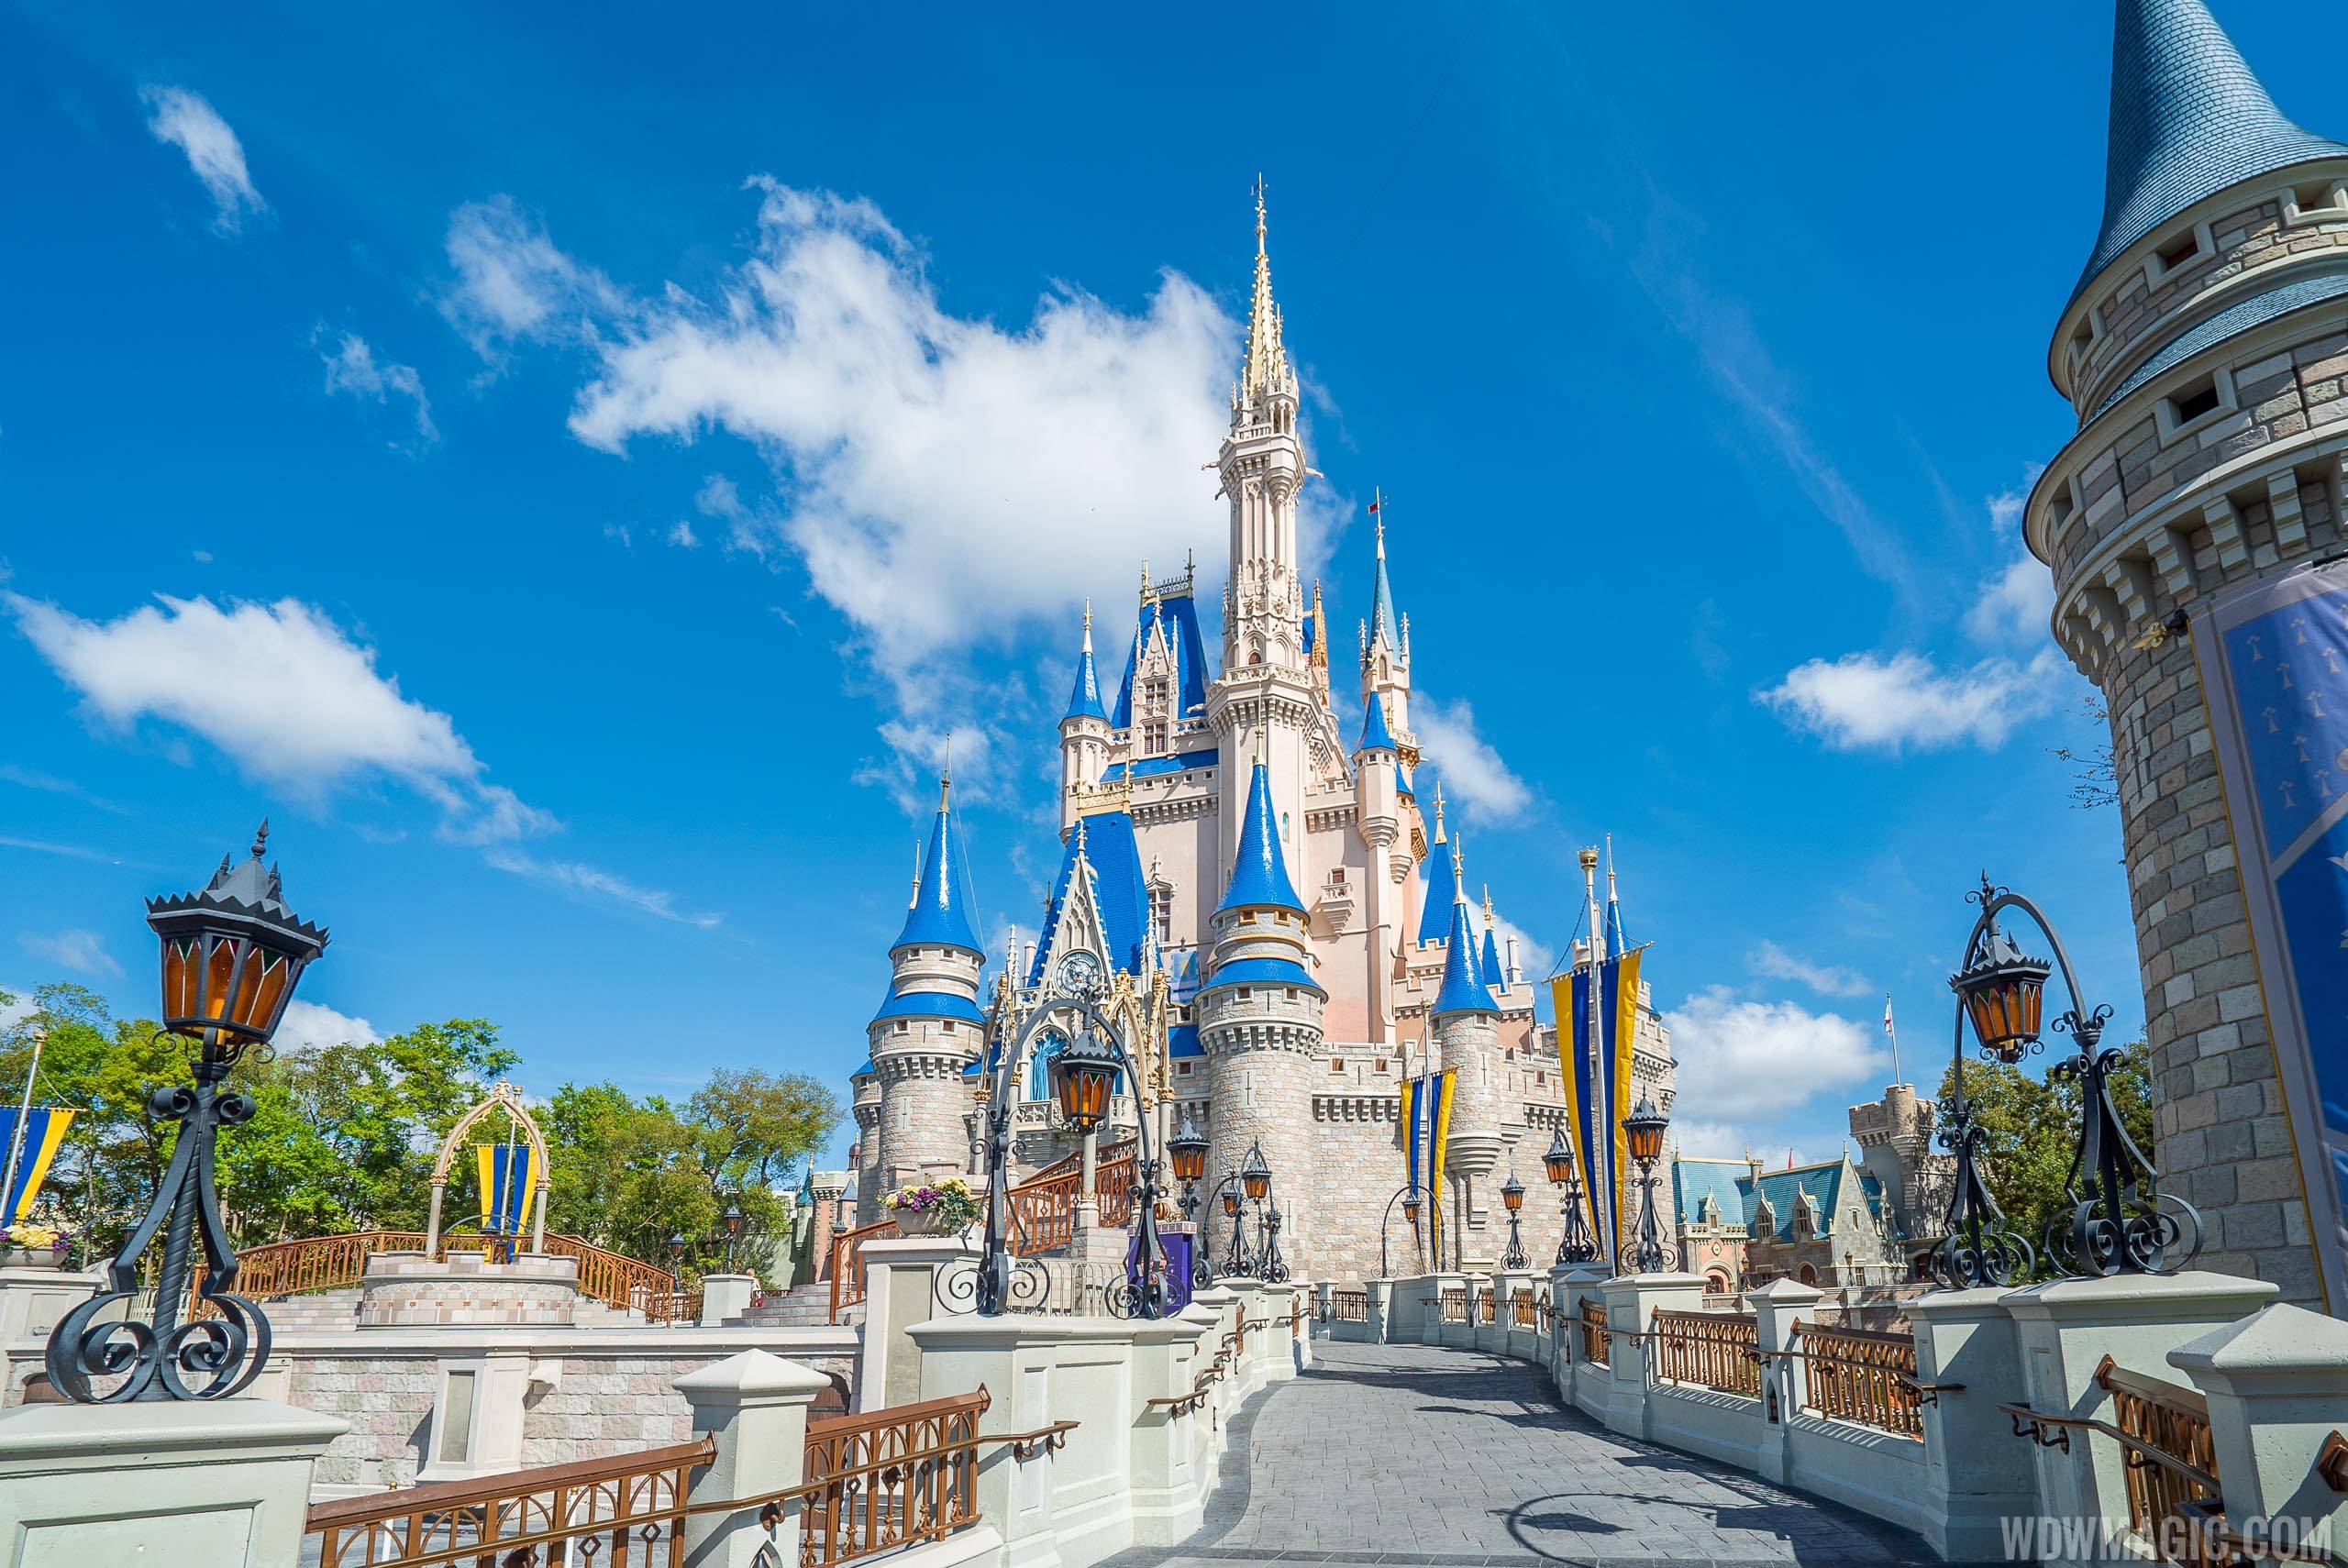 Walt Disney World theme parks have been closed since March 16